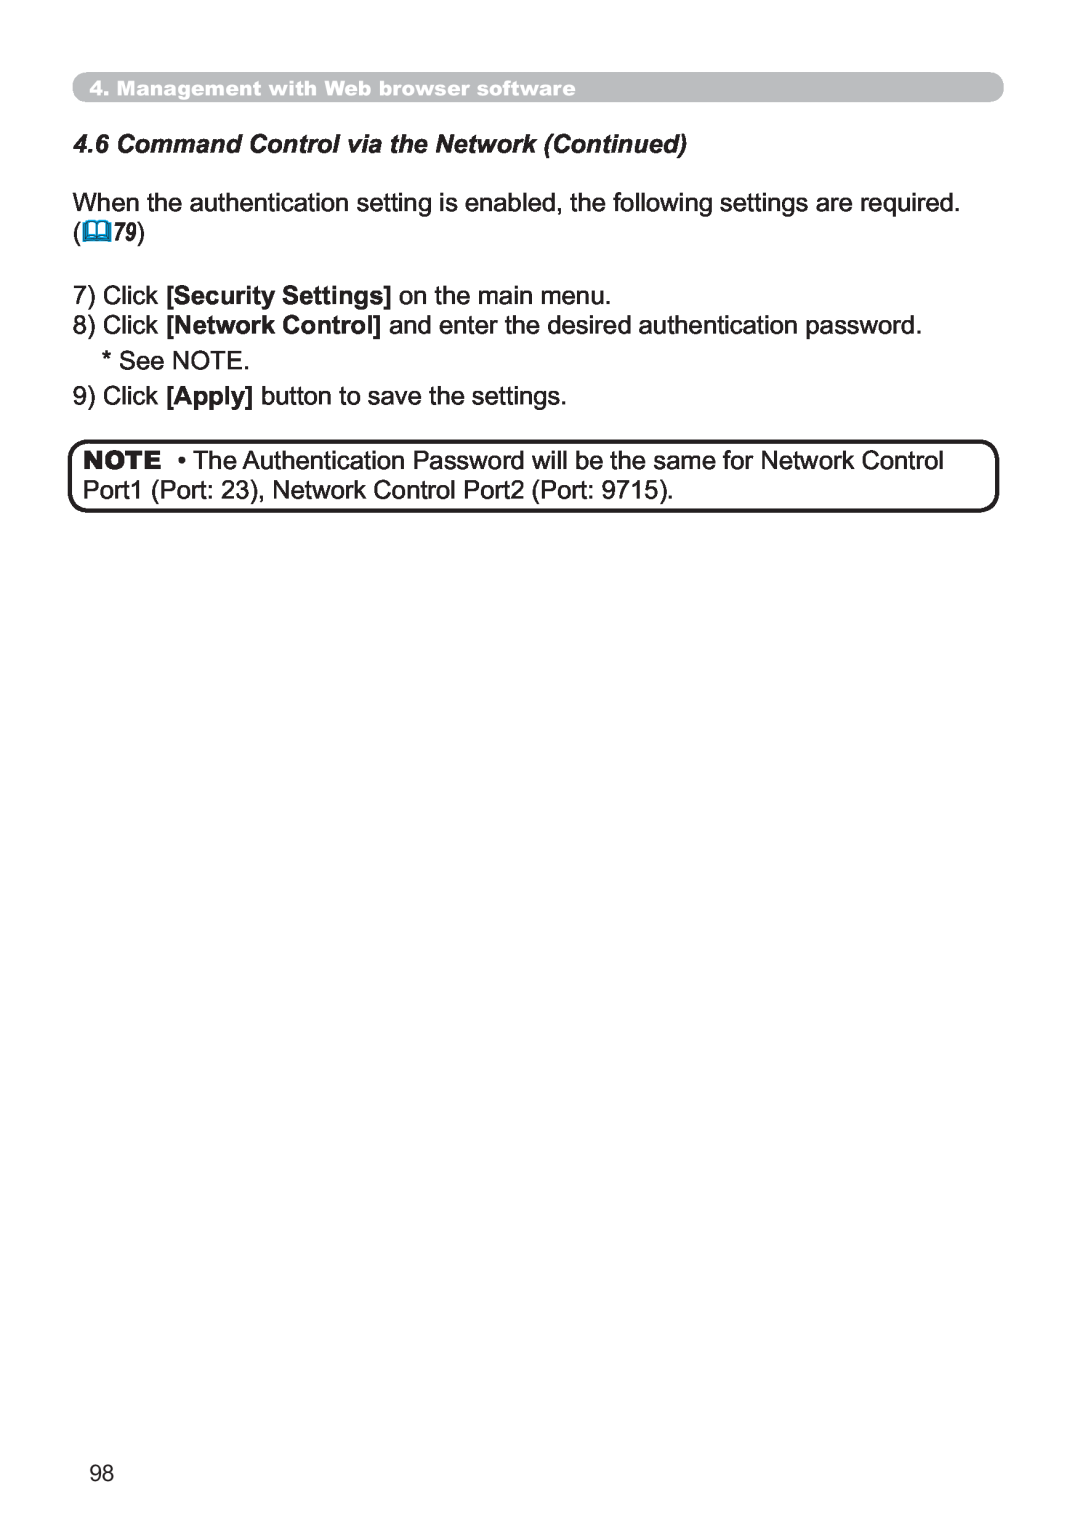 Hitachi CP-X809W user manual Command Control via the Network Continued, &OLFNSecurity Settings on the main menu 